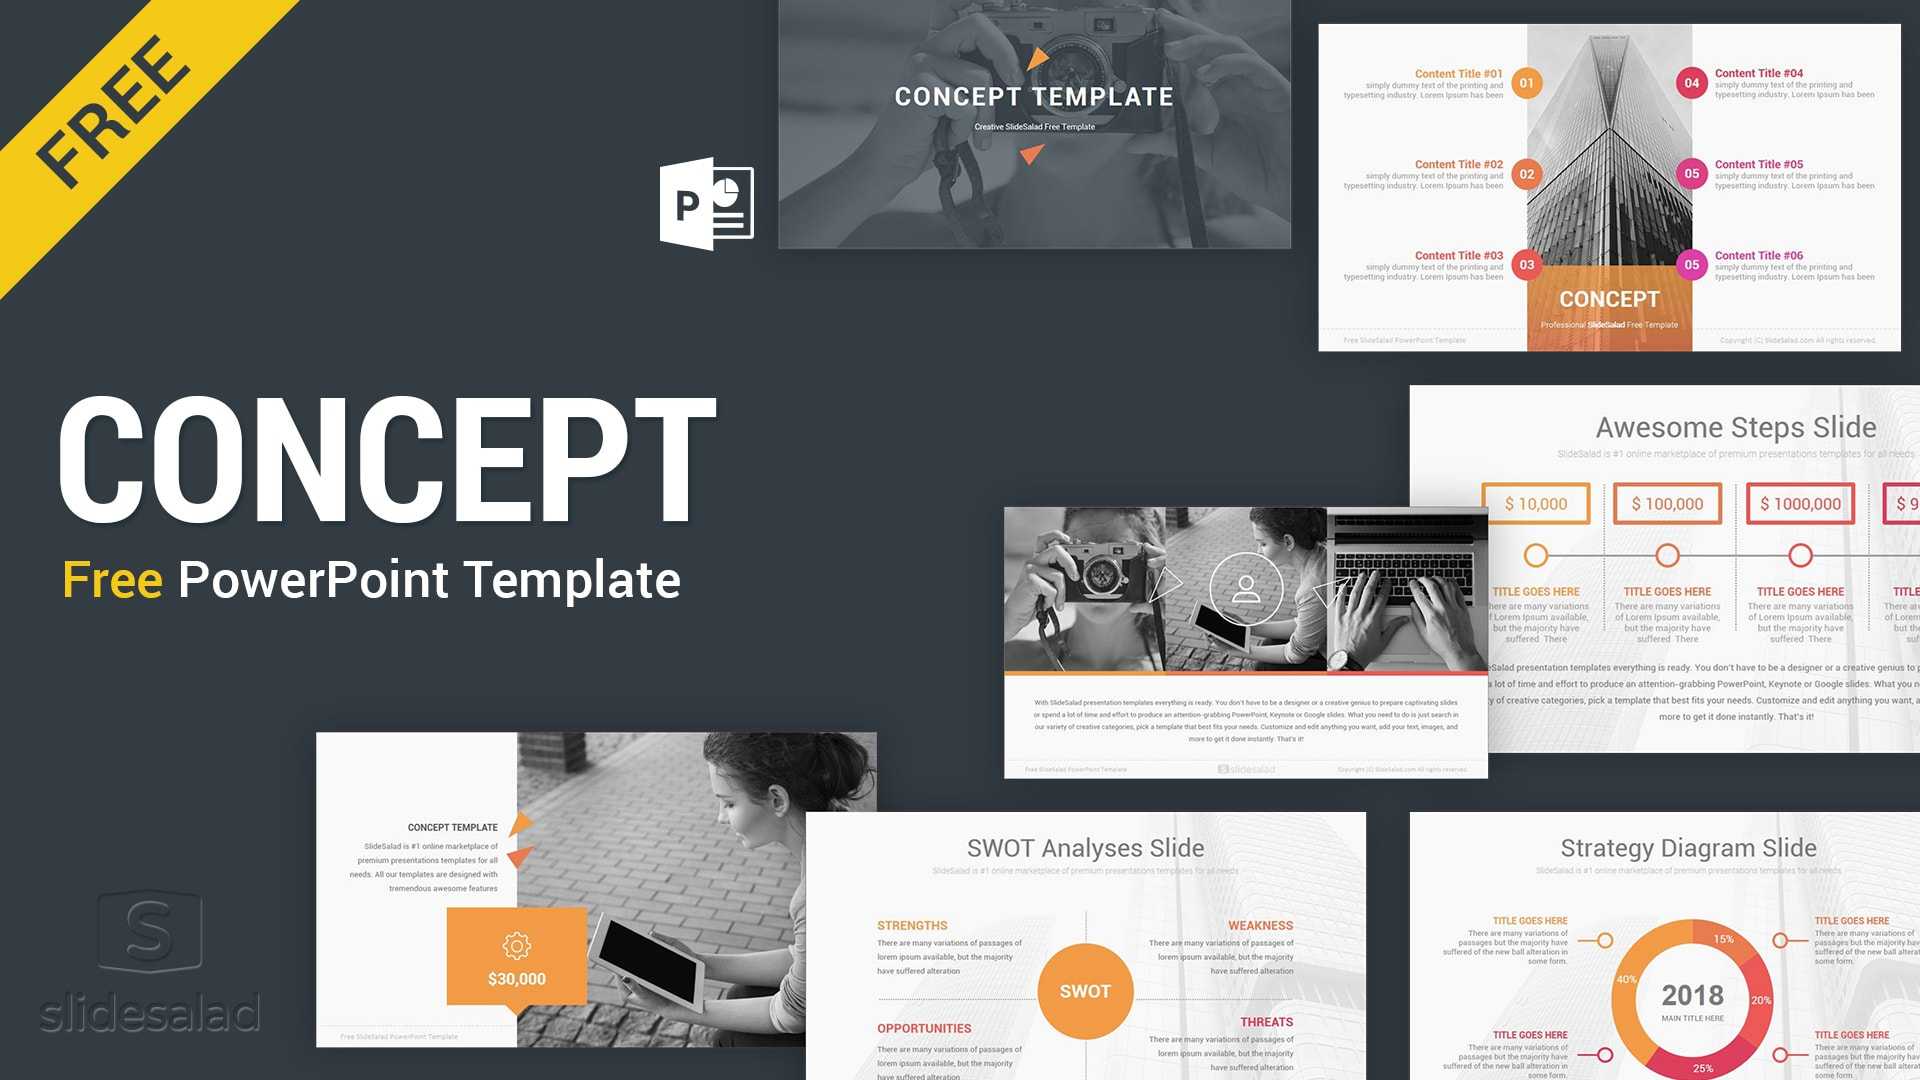 Best Free Presentation Templates Professional Designs 2019 Within Virus Powerpoint Template Free Download